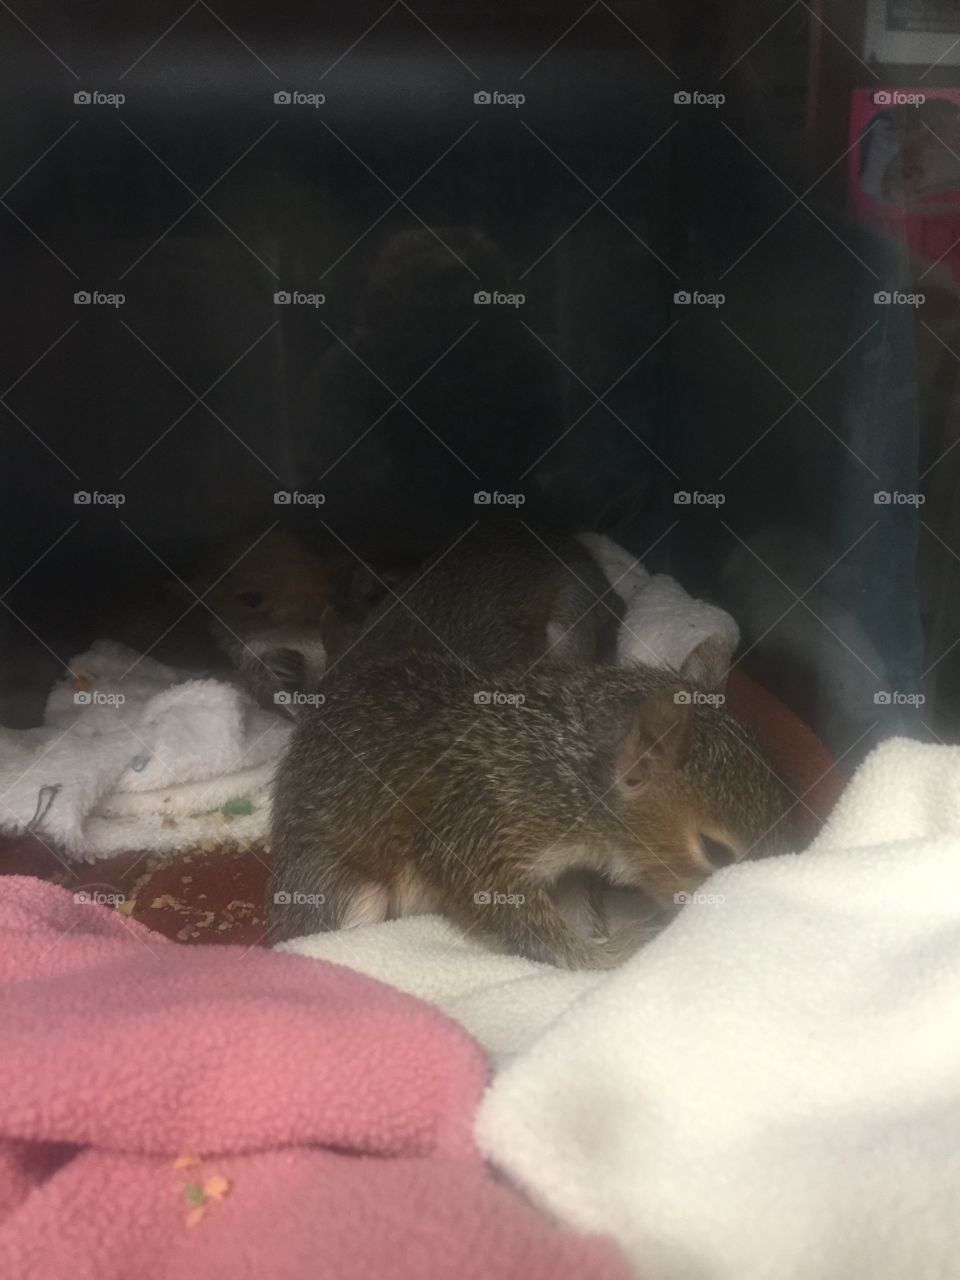 Baby squirrels playing in their incubator. 